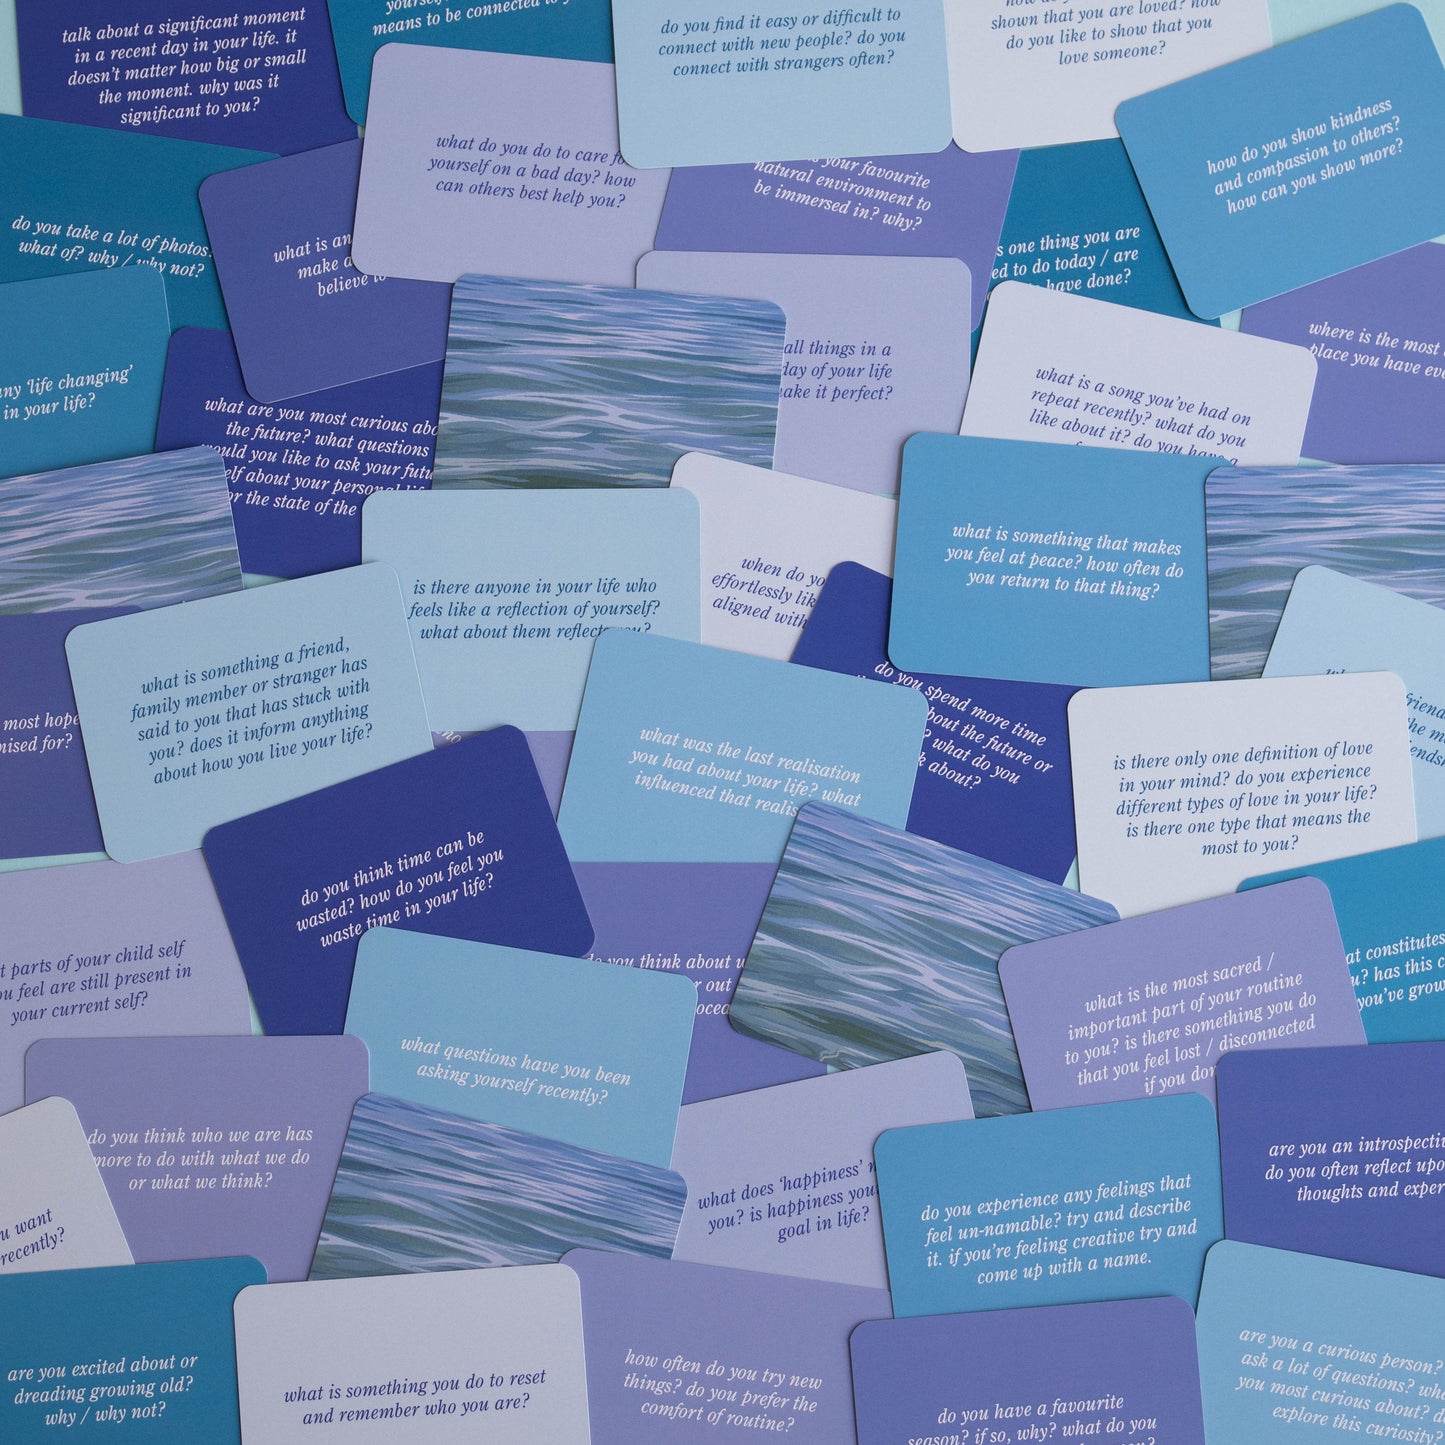 contemplations - question cards (for conversation and self-reflection)